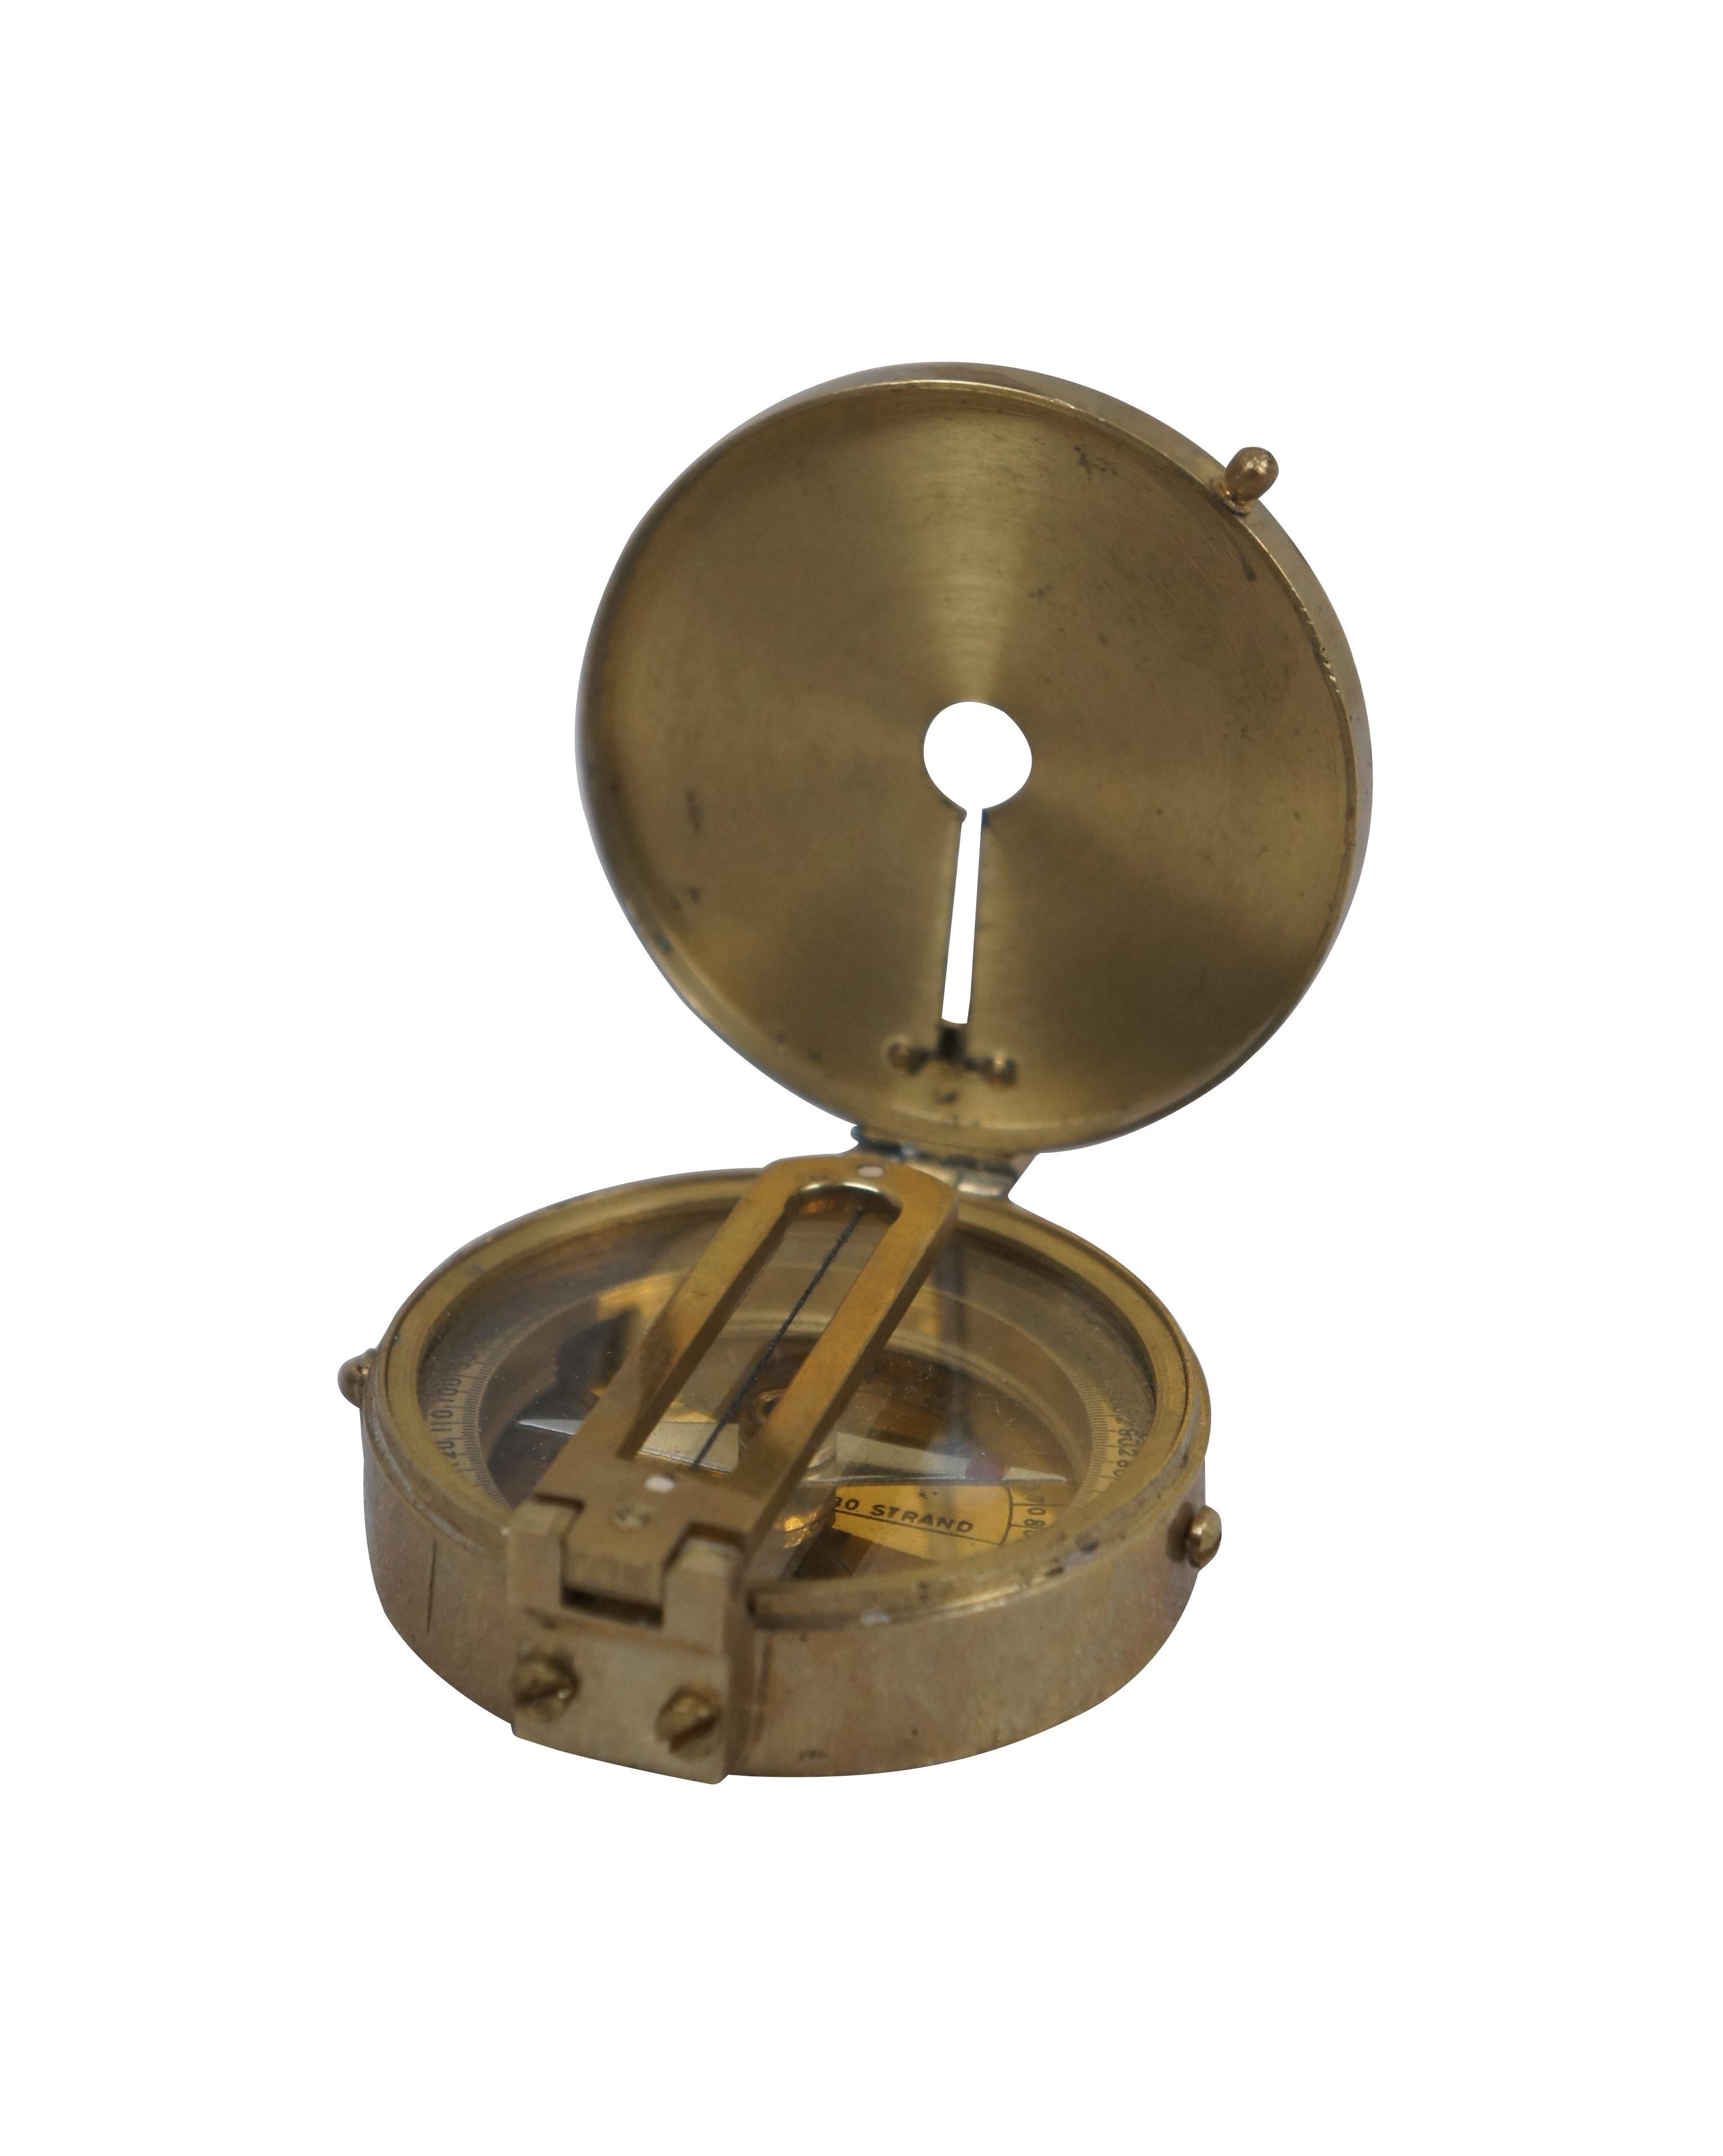 Antique Elliott Brothers of Ramsden, London brass surveyors / nautical maritime compass with brass case and face and folding sightline.

